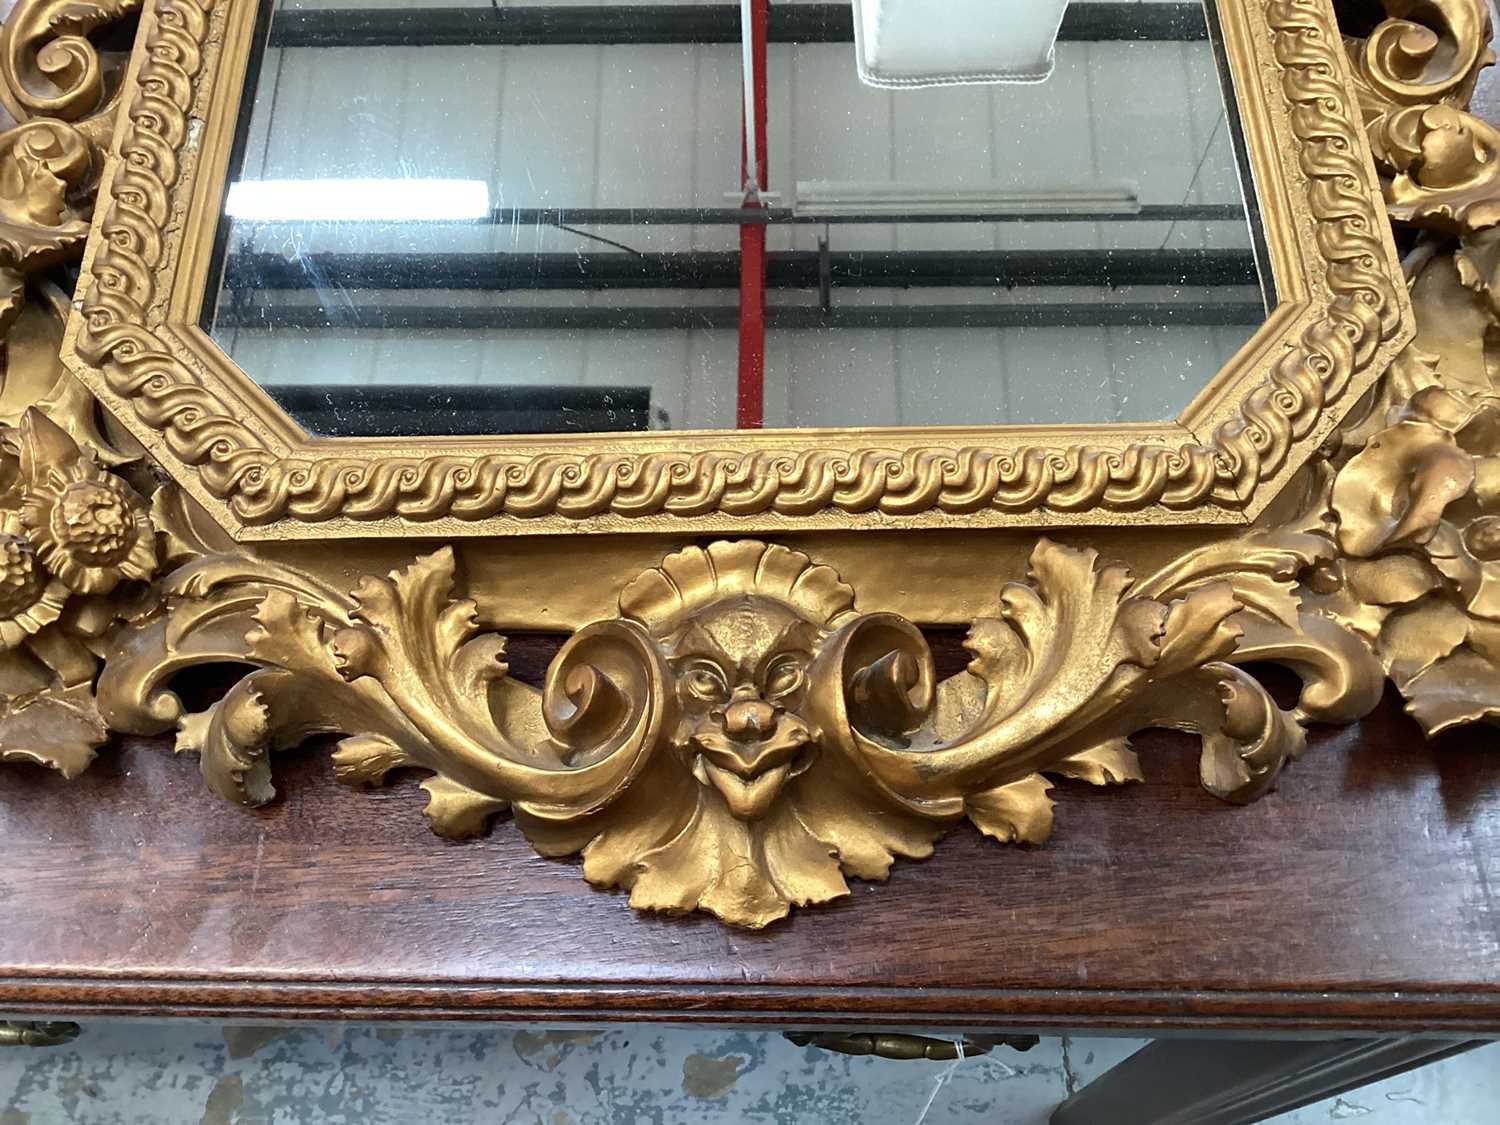 Antique carved giltwood decorative hanging mirror with central crest containing initials. - Image 3 of 4